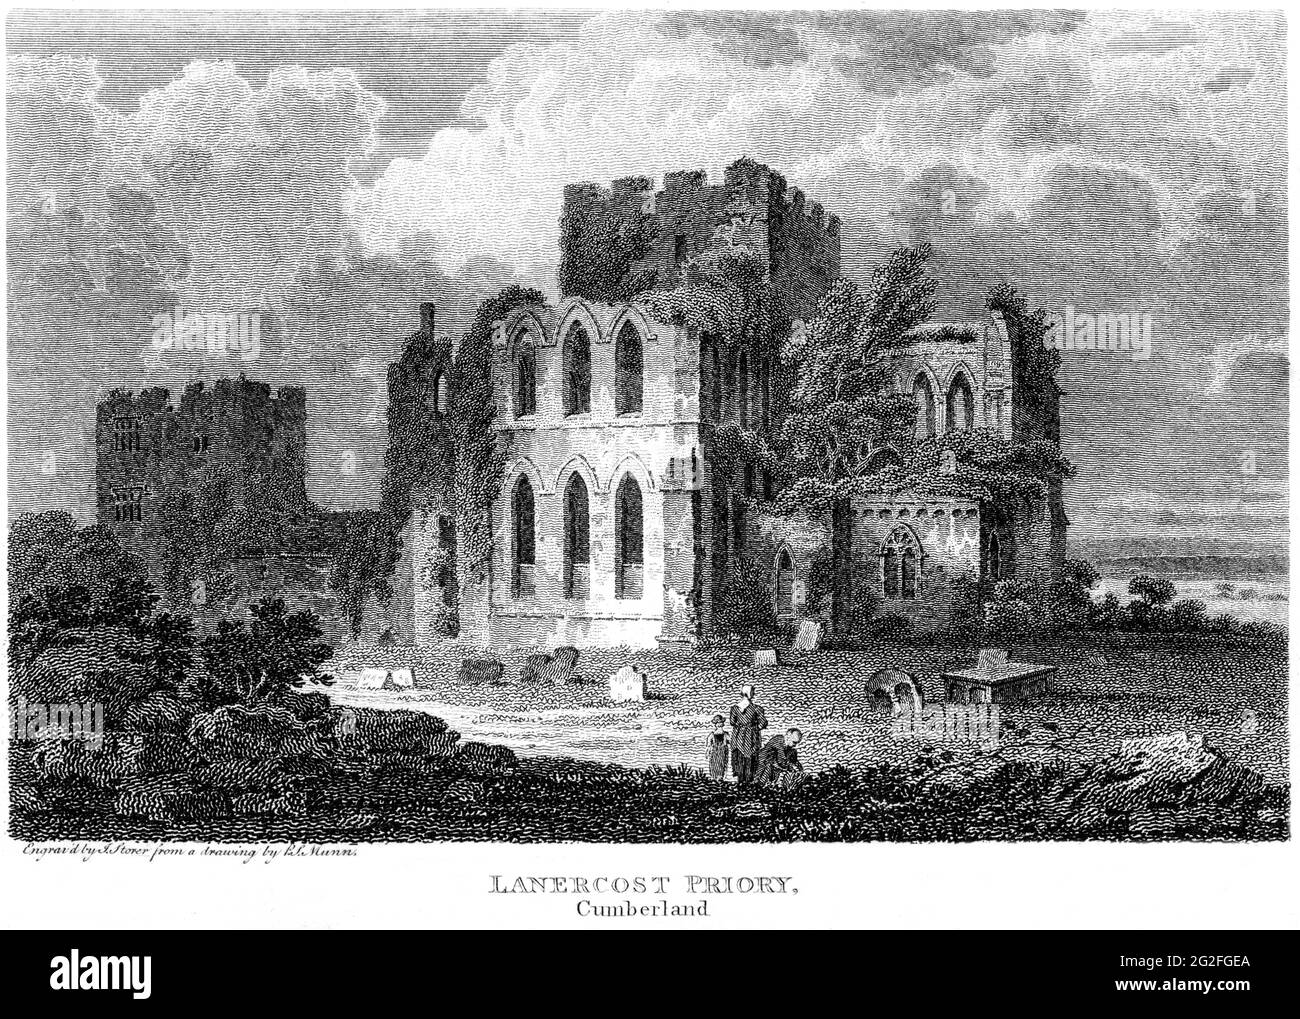 An engraving of Lanercost Priory, Cumberland scanned at high resolution from a book printed in 1812. Believed copyright free. Stock Photo